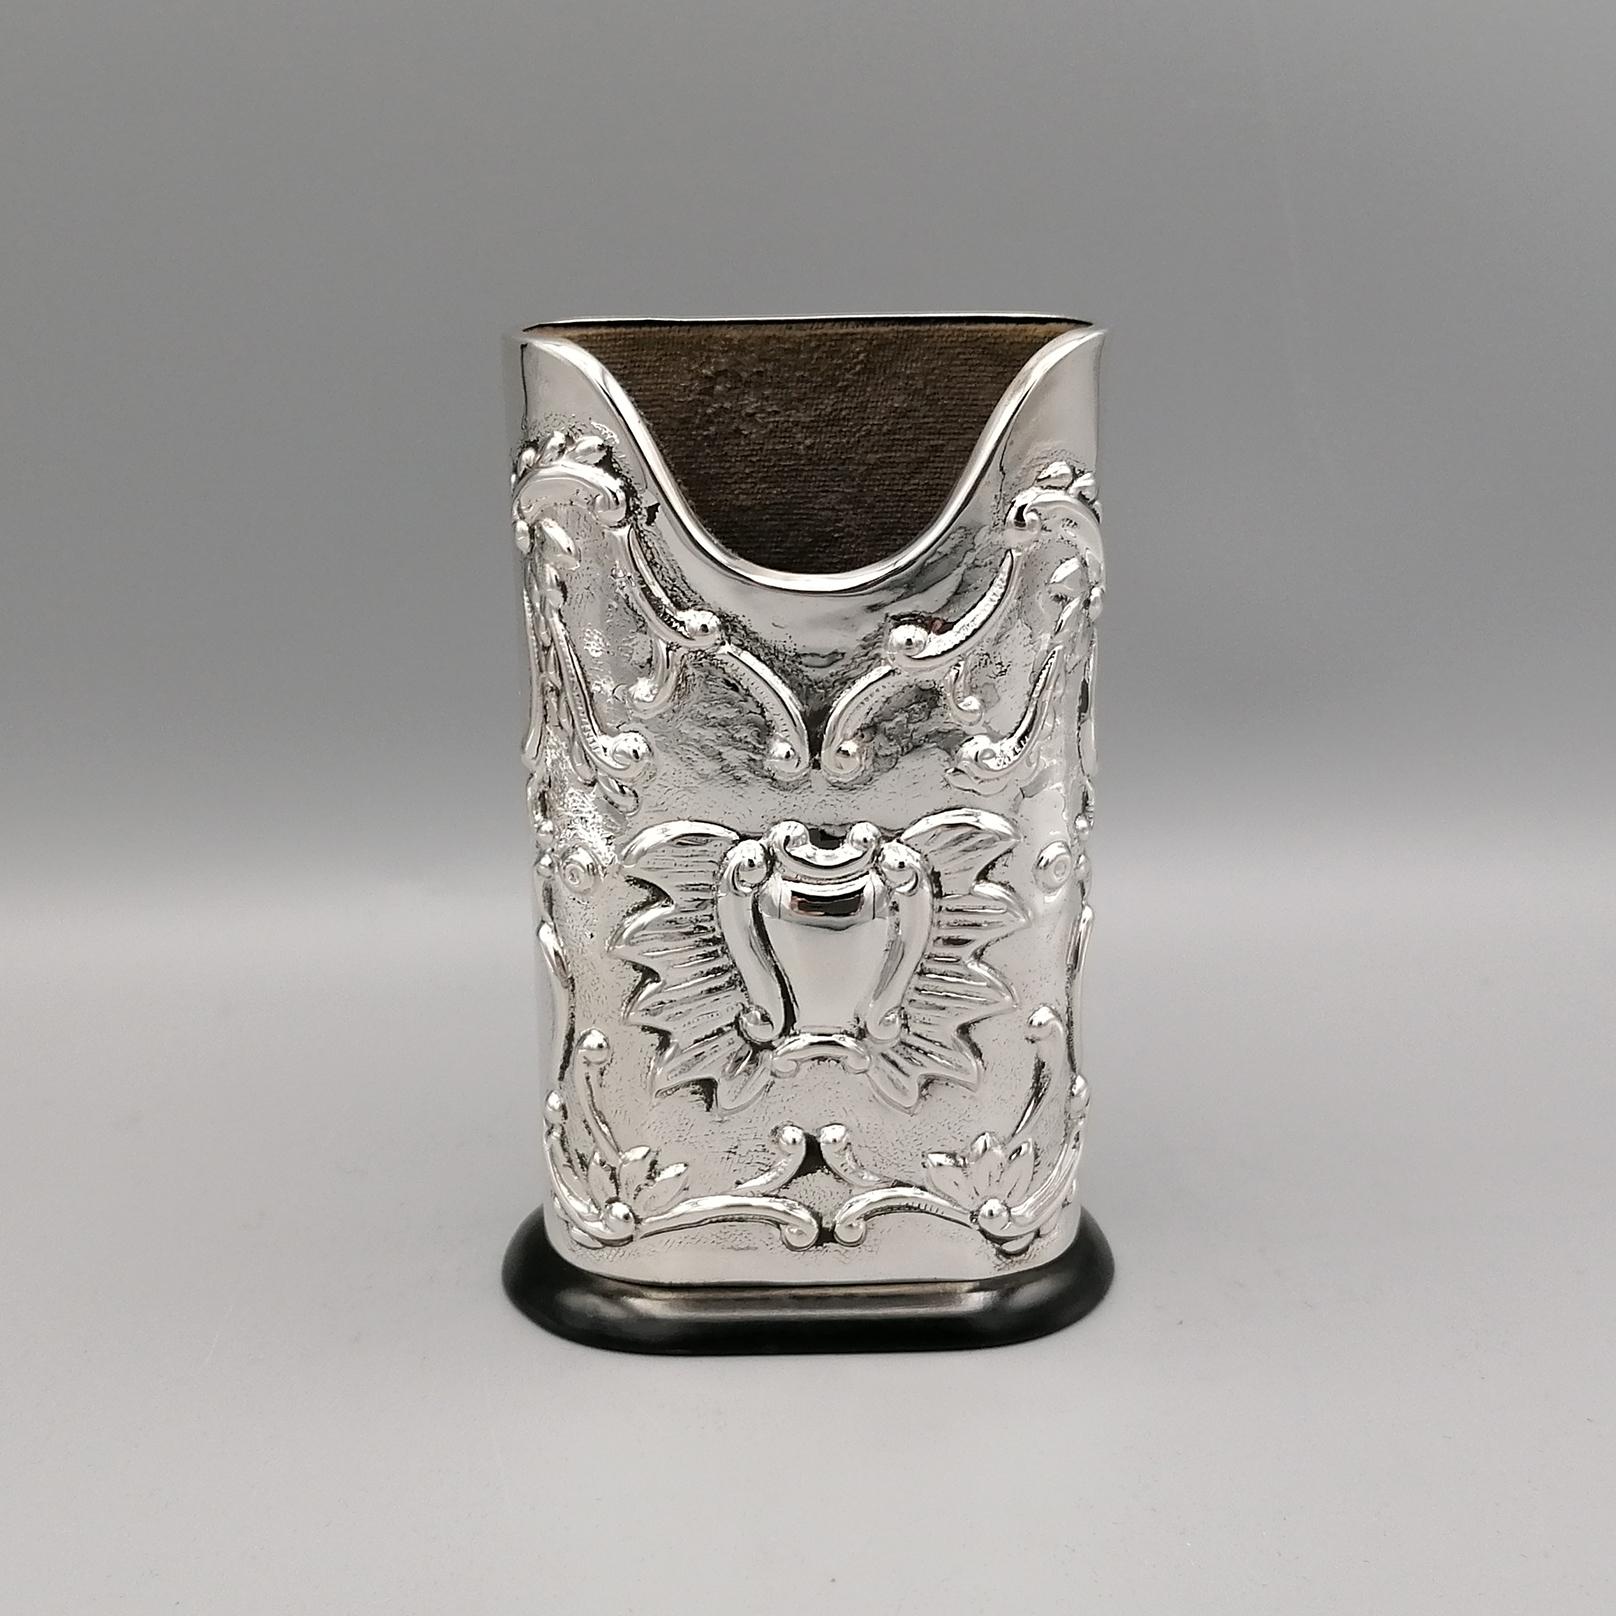 Large, completely handmade, sterling silver pern holder 
Perfect for a prestigious desk.
The pen holder is embossed by hand on both sides with scrolls and floral motifs

By Goldsilver Fani - Florence - Italy
for ARVAL ARGENTI VALENZA.
   